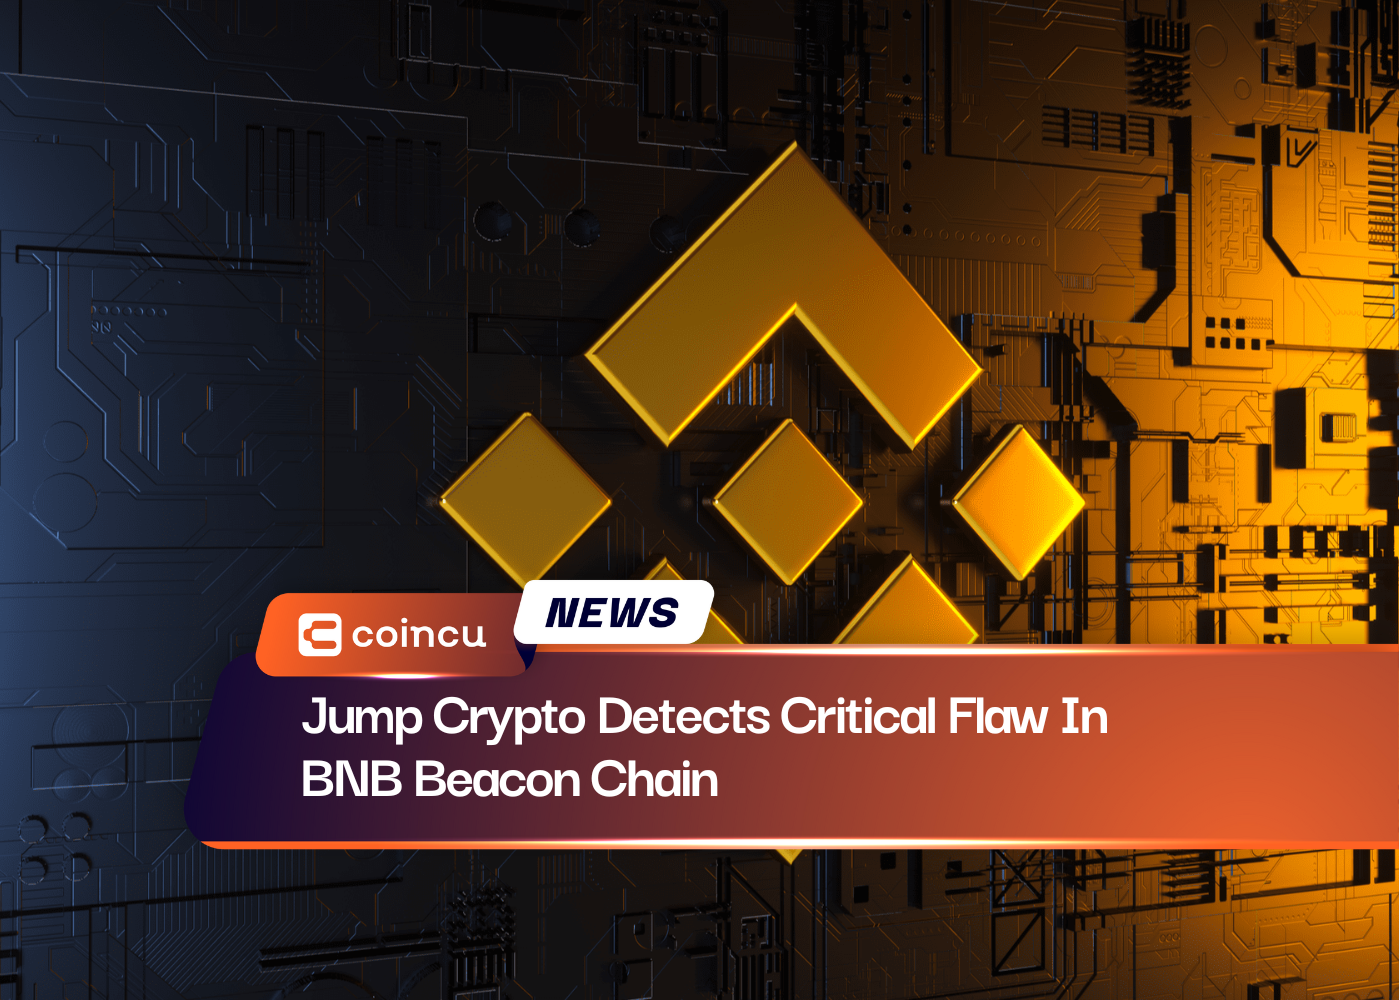 Jump Crypto Detects Critical Flaw In BNB Beacon Chain